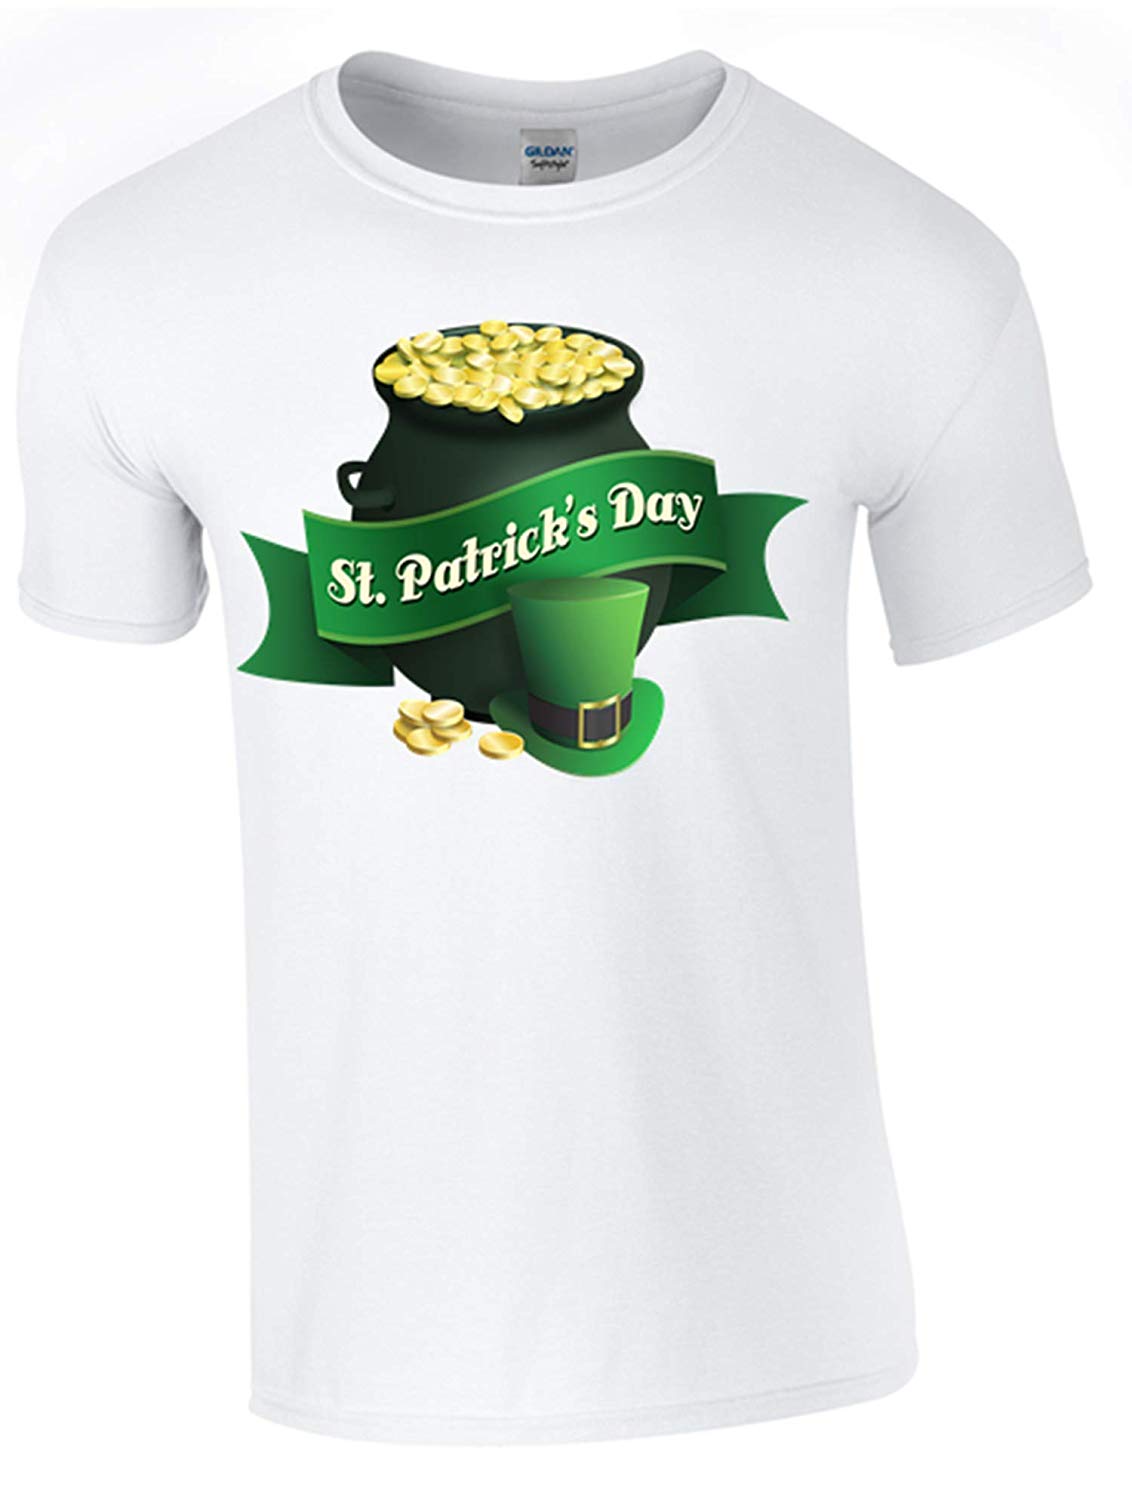 St Patrick's Day Celebration T-Shirt - Army 1157 Kit  Veterans Owned Business